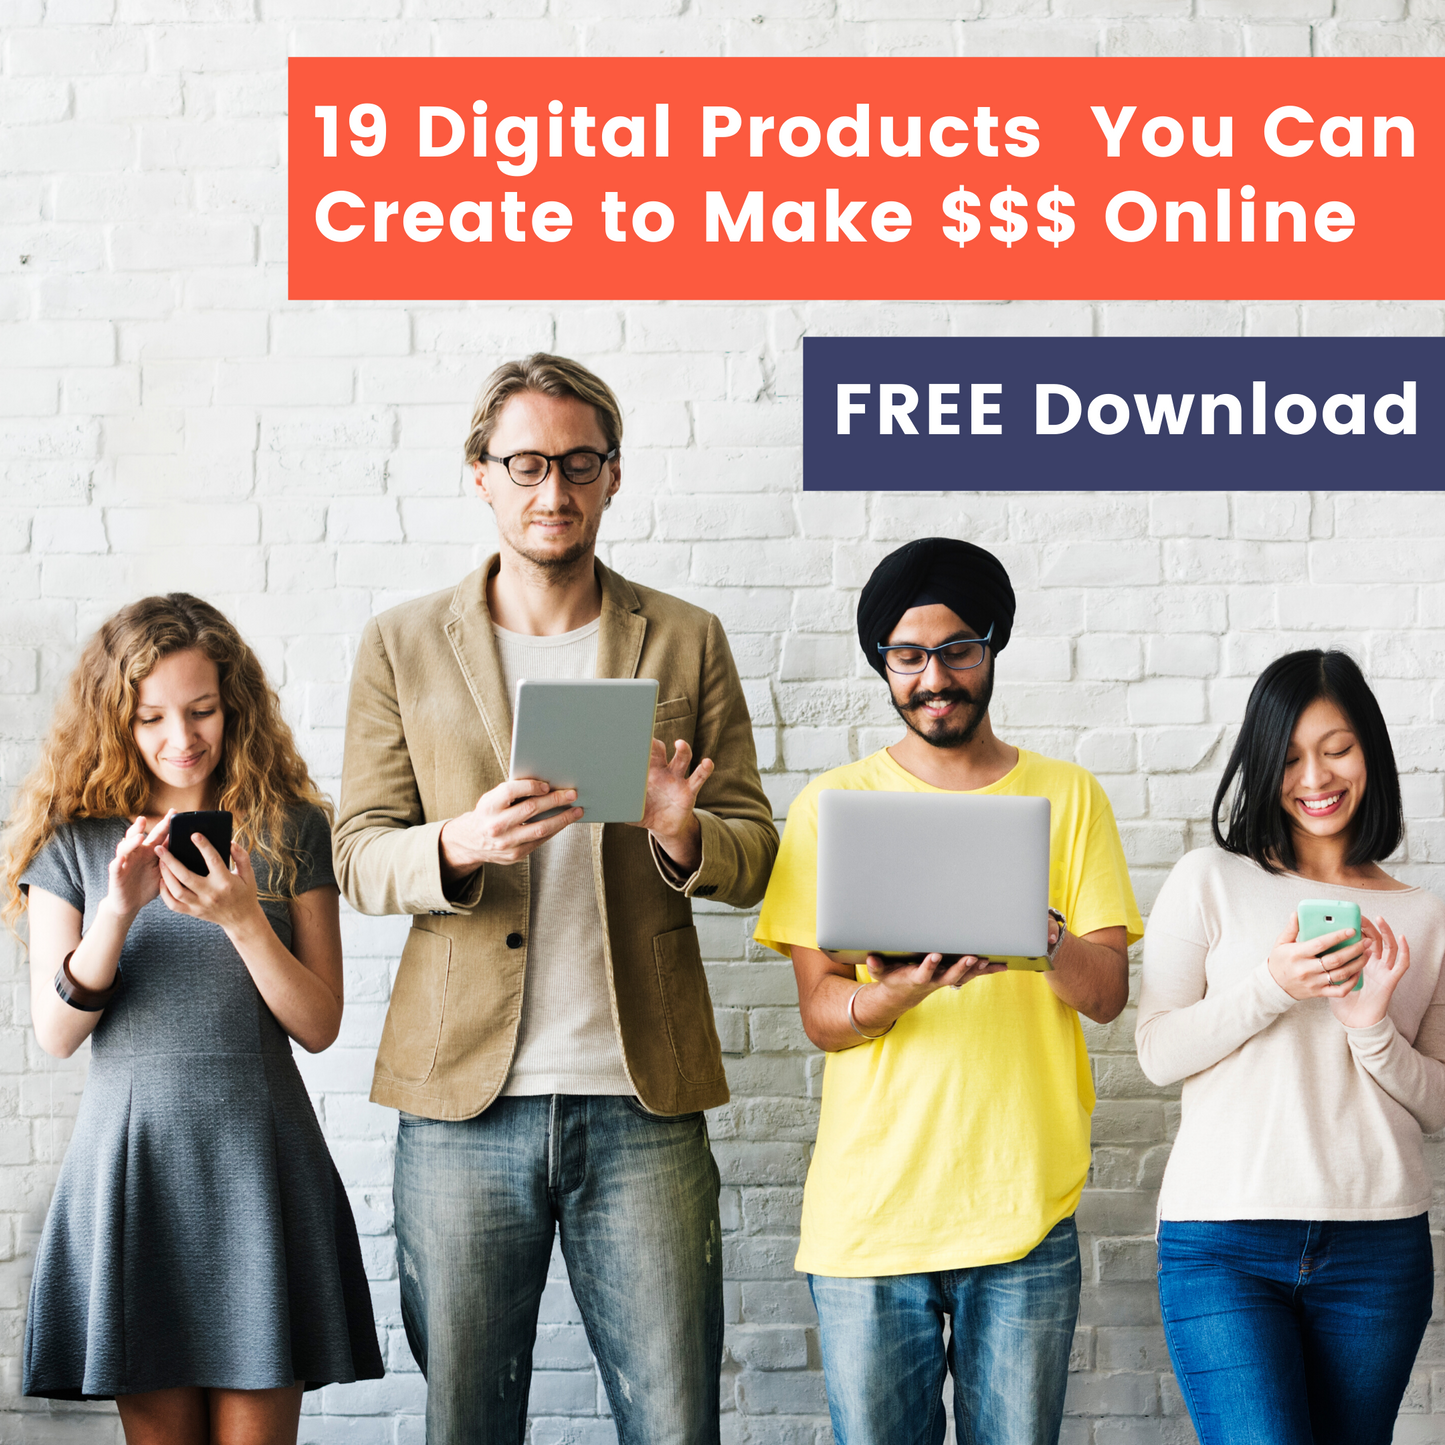 The 19 Most Profitable Digital Products You Can Make